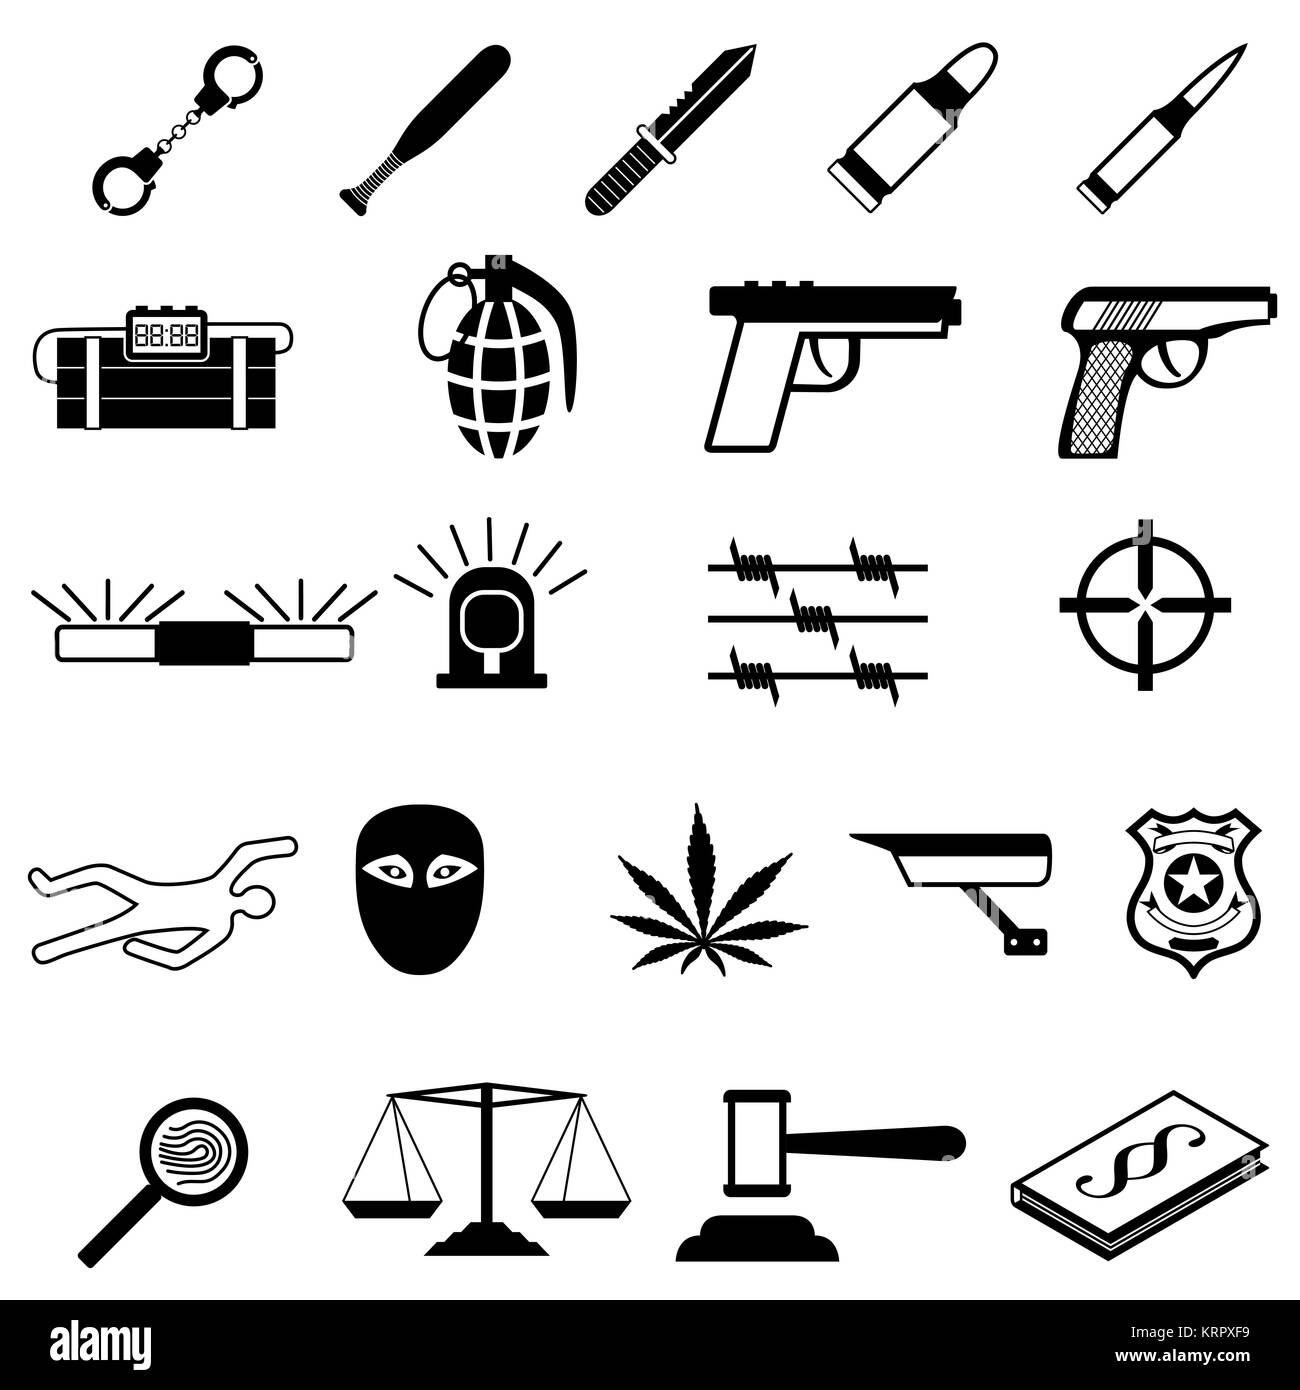 Crime Icons set - Isolated on white background Stock Vector